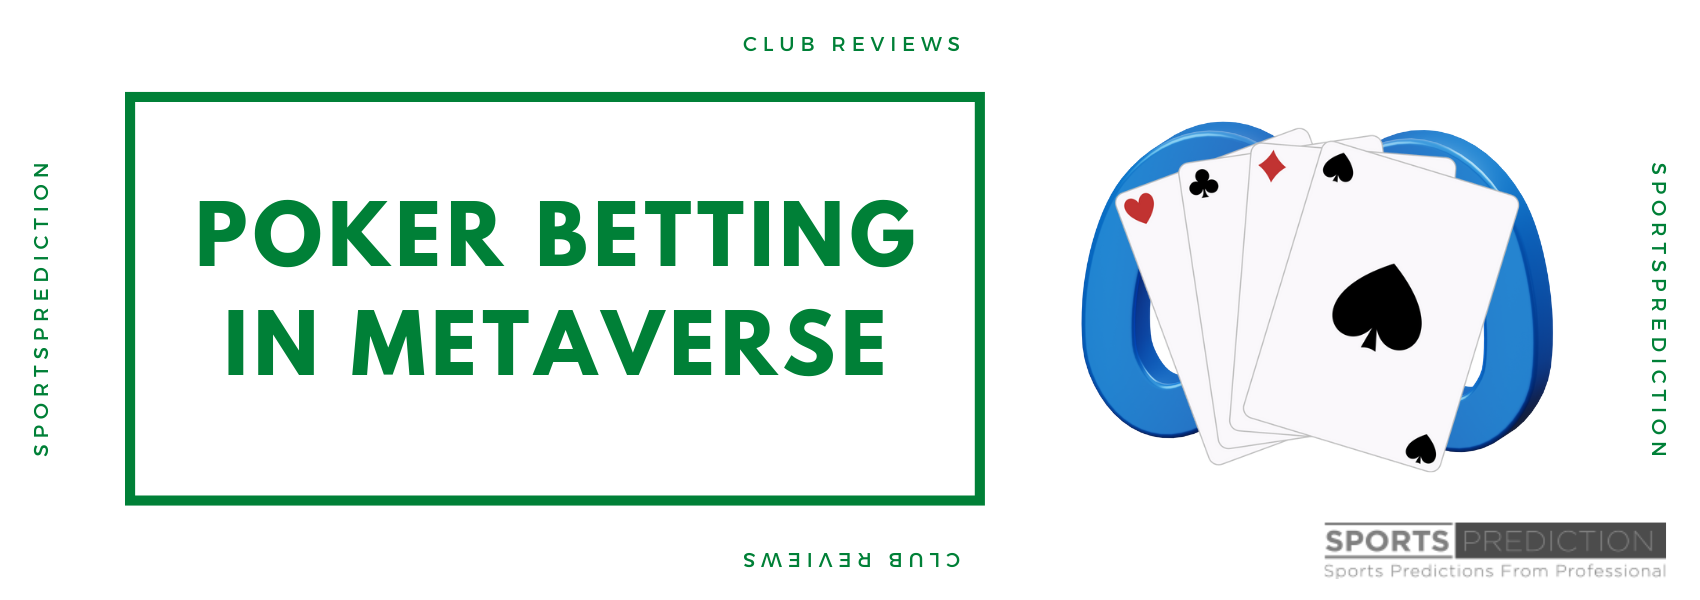 Poker: Where Metaverse And Gambling Joints